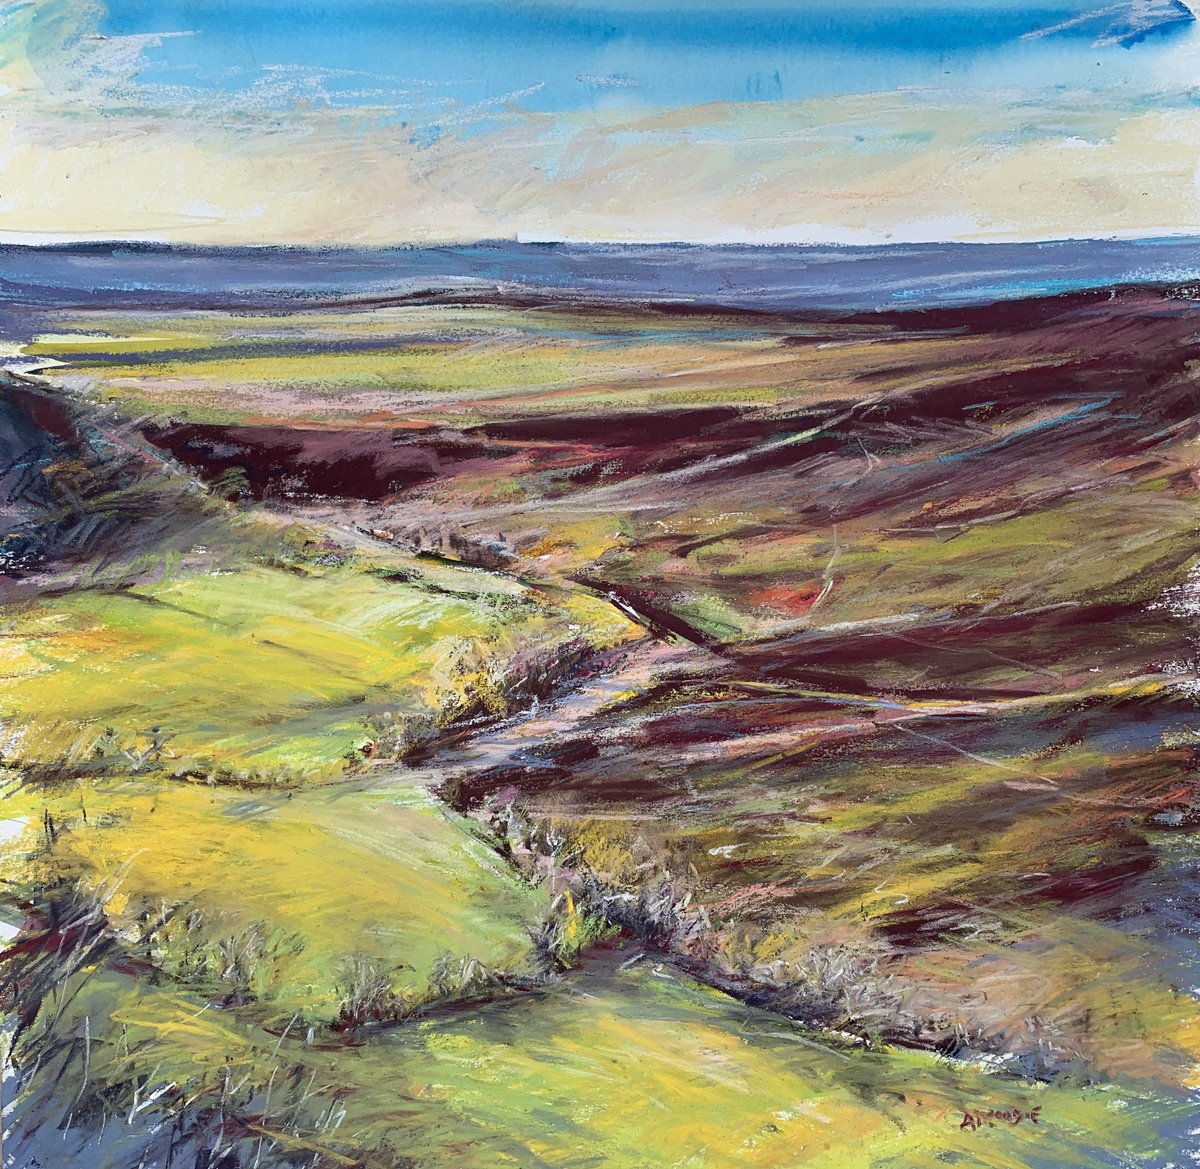 Hole of Horcum by Andrew Moodie